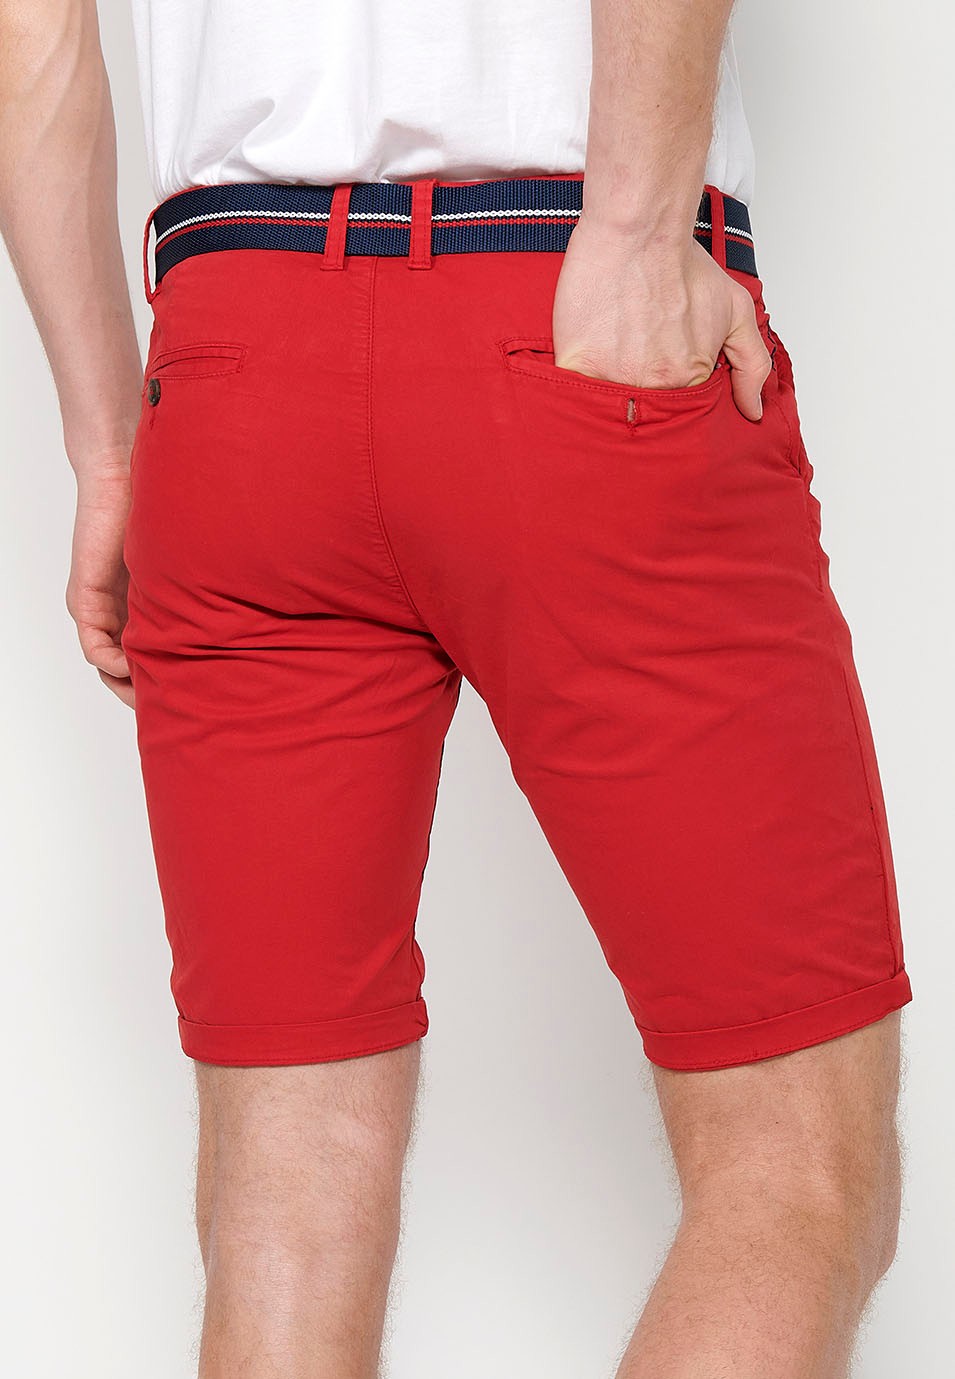 Shorts with cuffed finish with front closure with zipper and button and belt in Red for Men 8